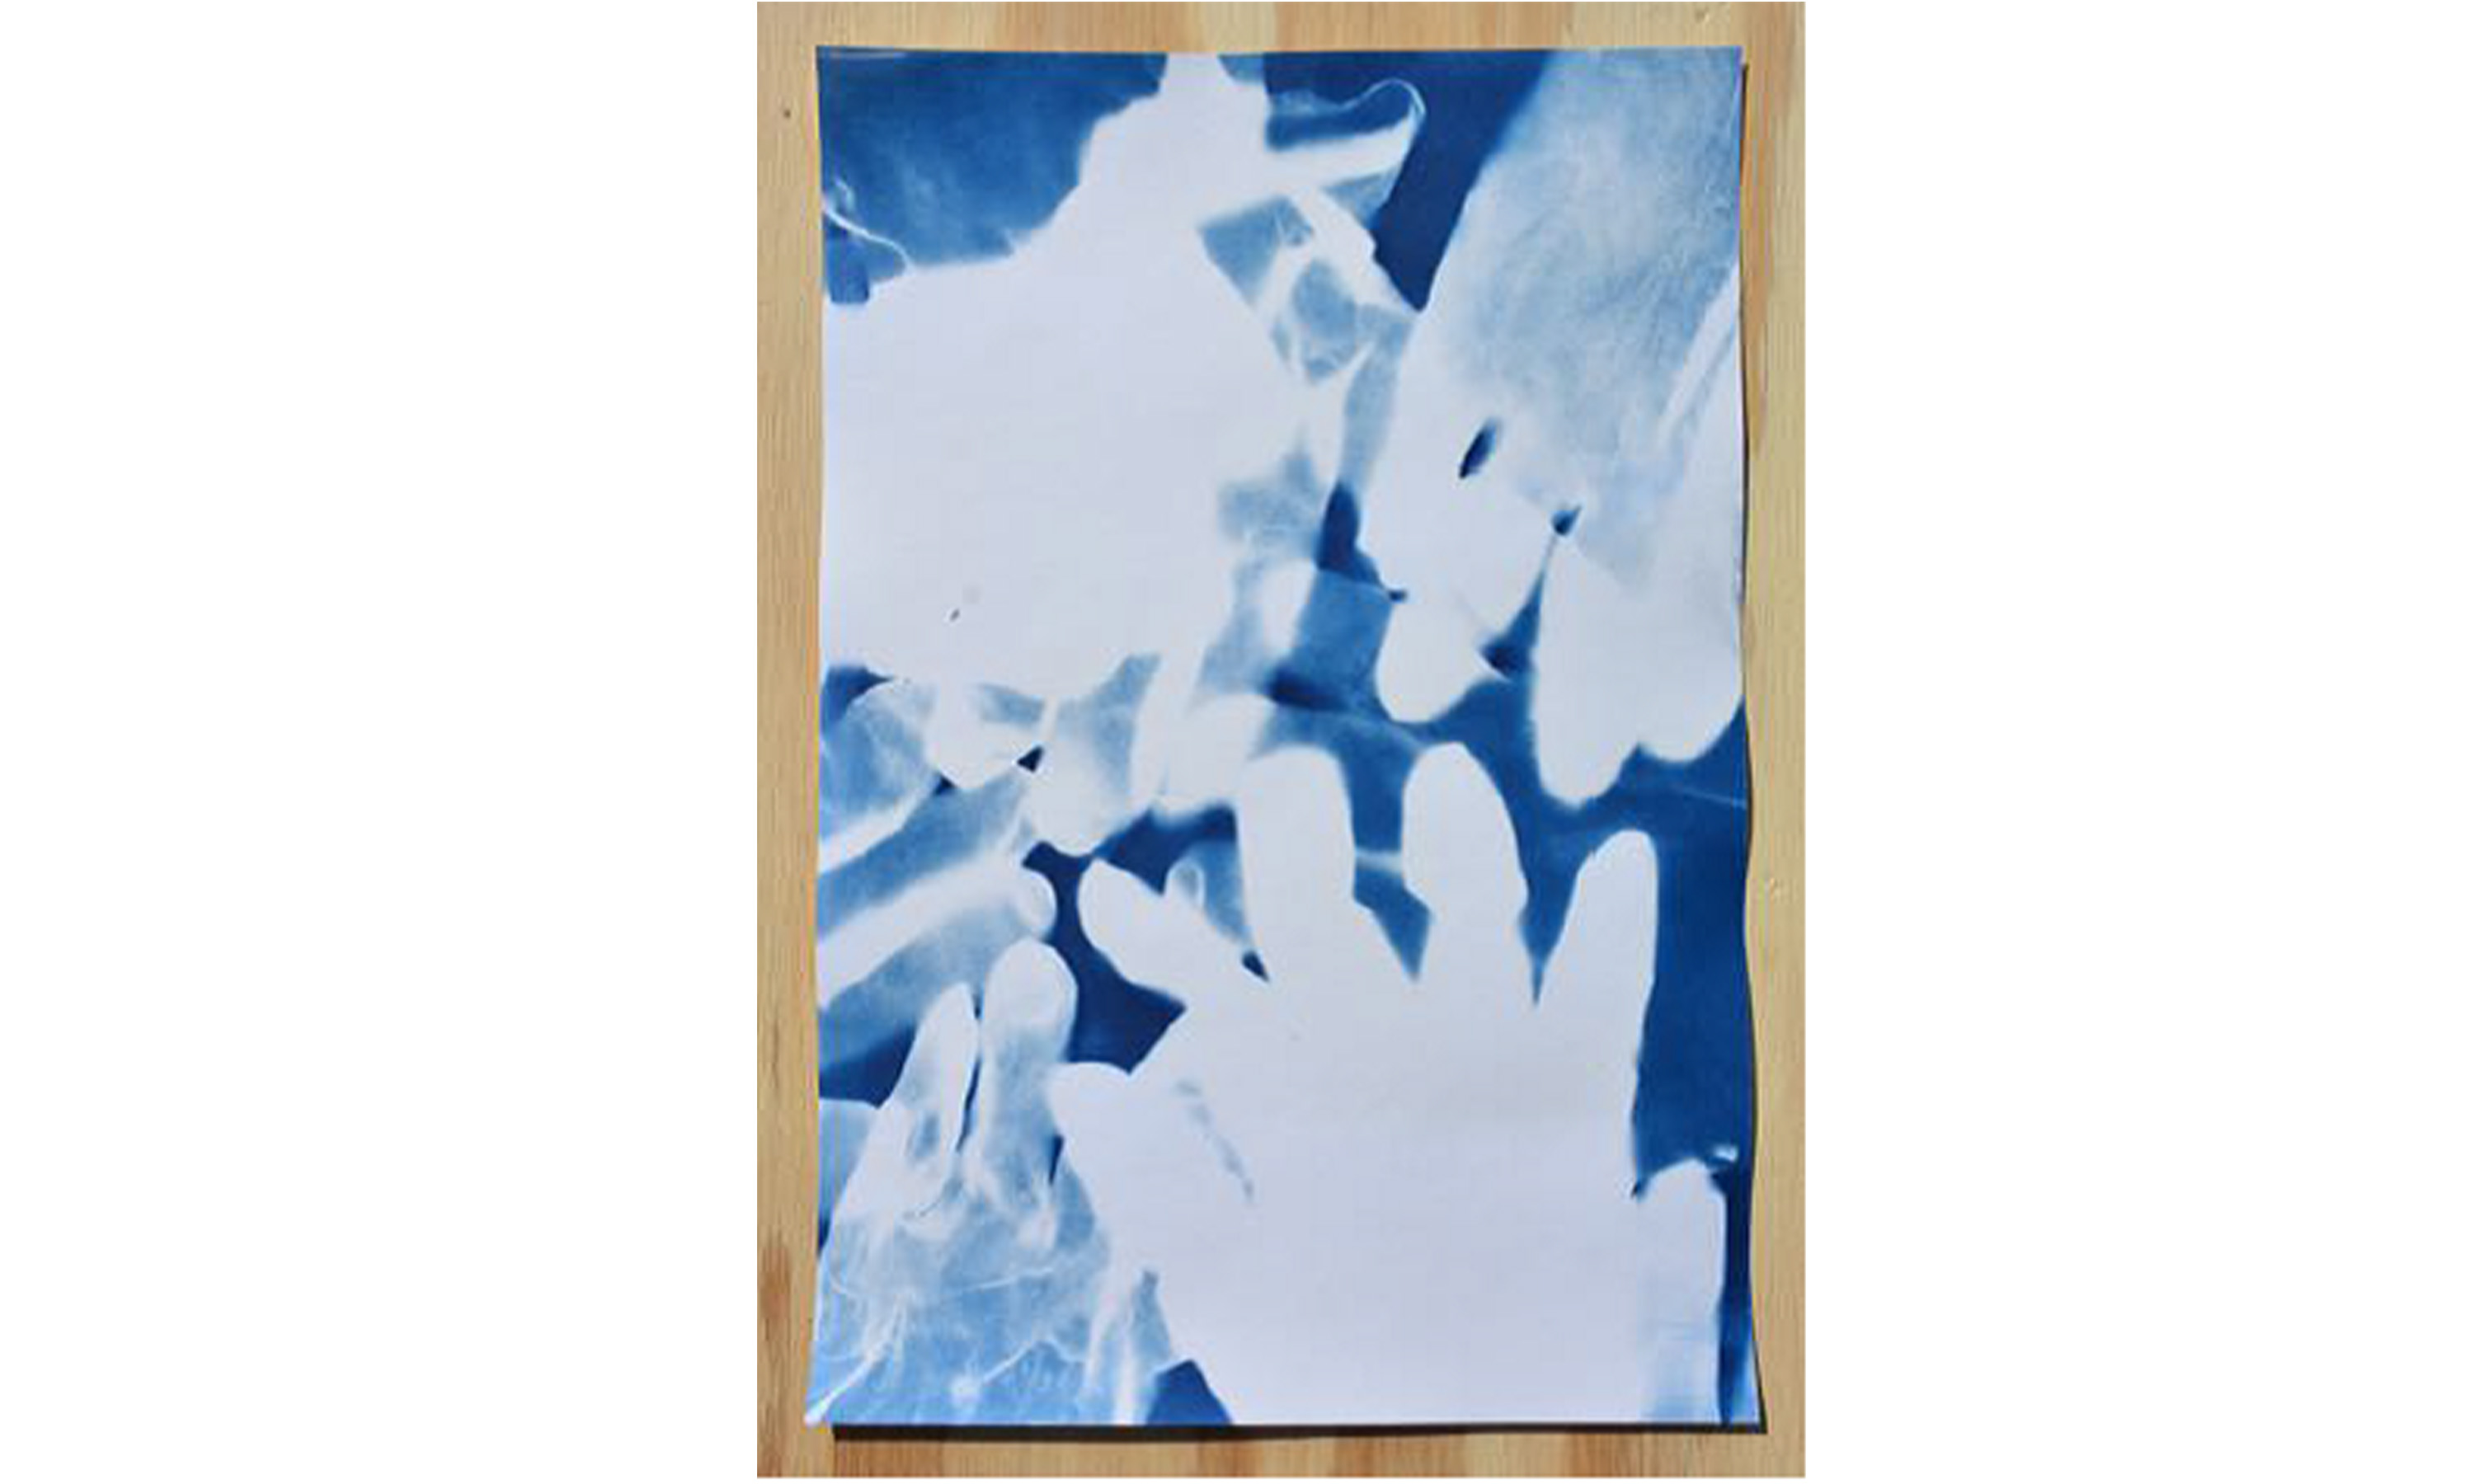 A simple process one can do while social distancing inspired by the  cyanotypes of Anna Atkins